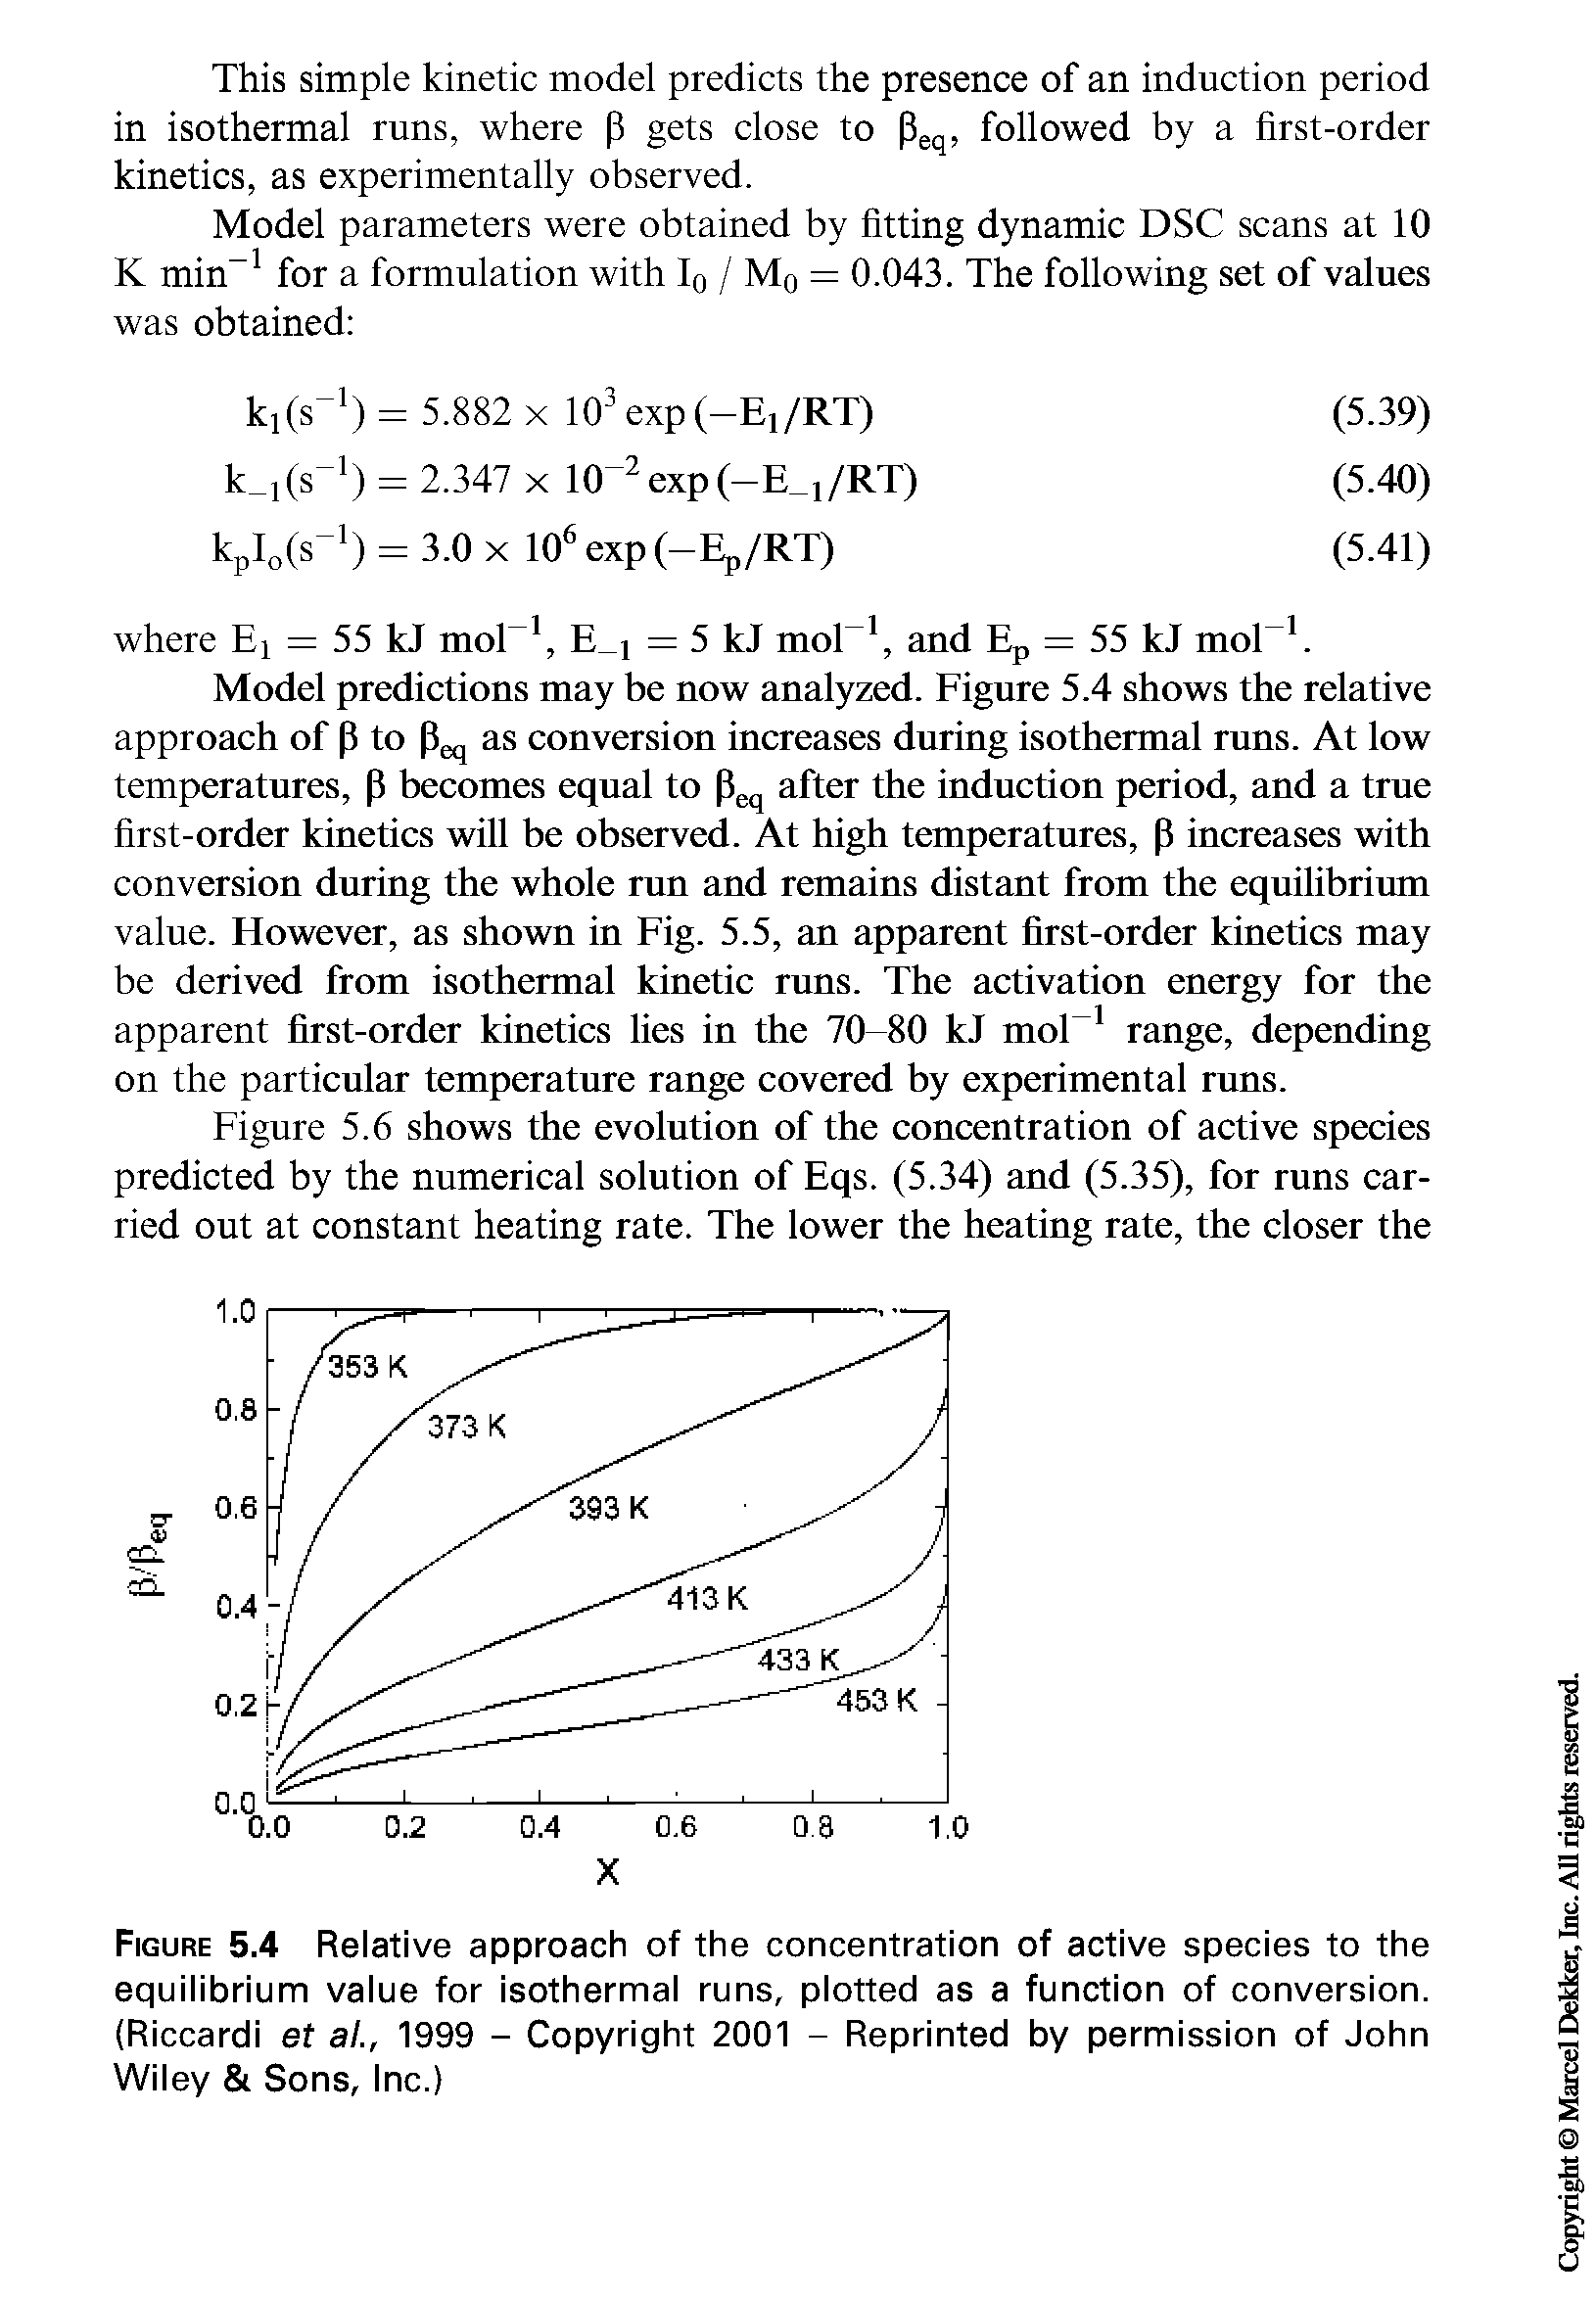 Figure 5.4 Relative approach of the concentration of active species to the equilibrium value for isothermal runs, plotted as a function of conversion. (Riccardi et at., 1999 - Copyright 2001 - Reprinted by permission of John Wiley Sons, Inc.)...